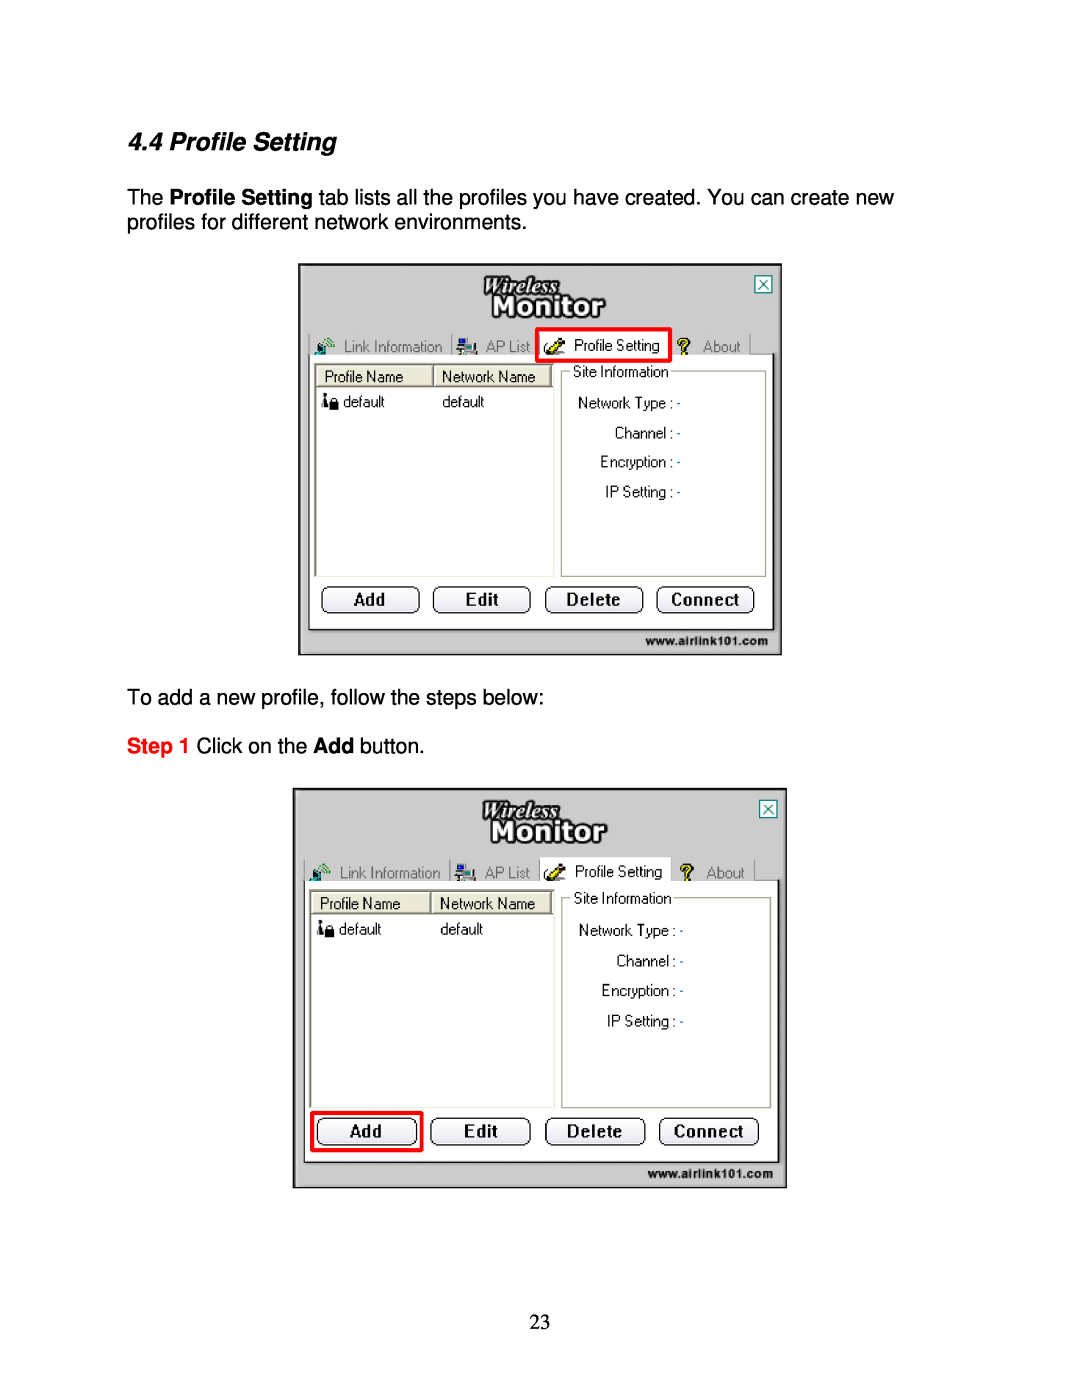 Airlink101 AWLH5025 user manual Profile Setting, To add a new profile, follow the steps below, Click on the Add button 